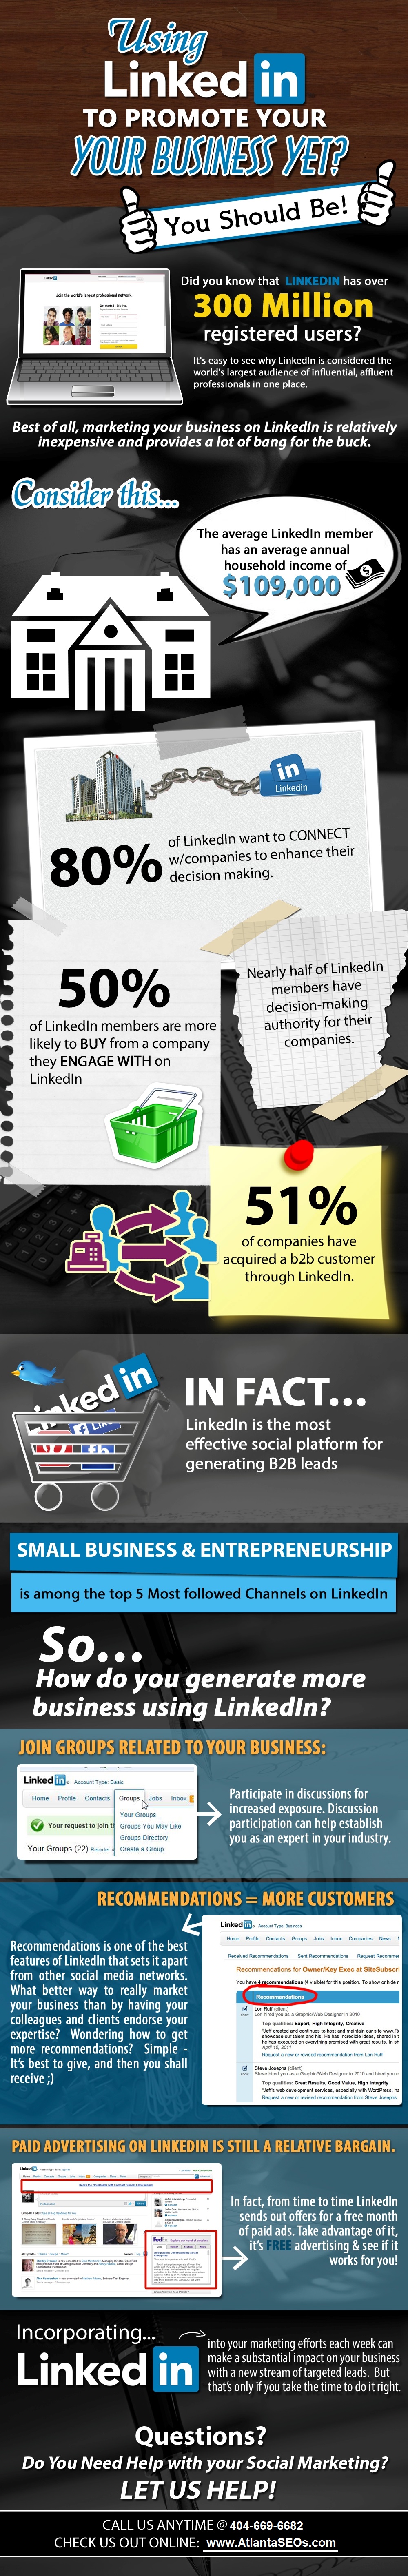 Infographic Are You Using LinkedIn to Promote Your Business Yet